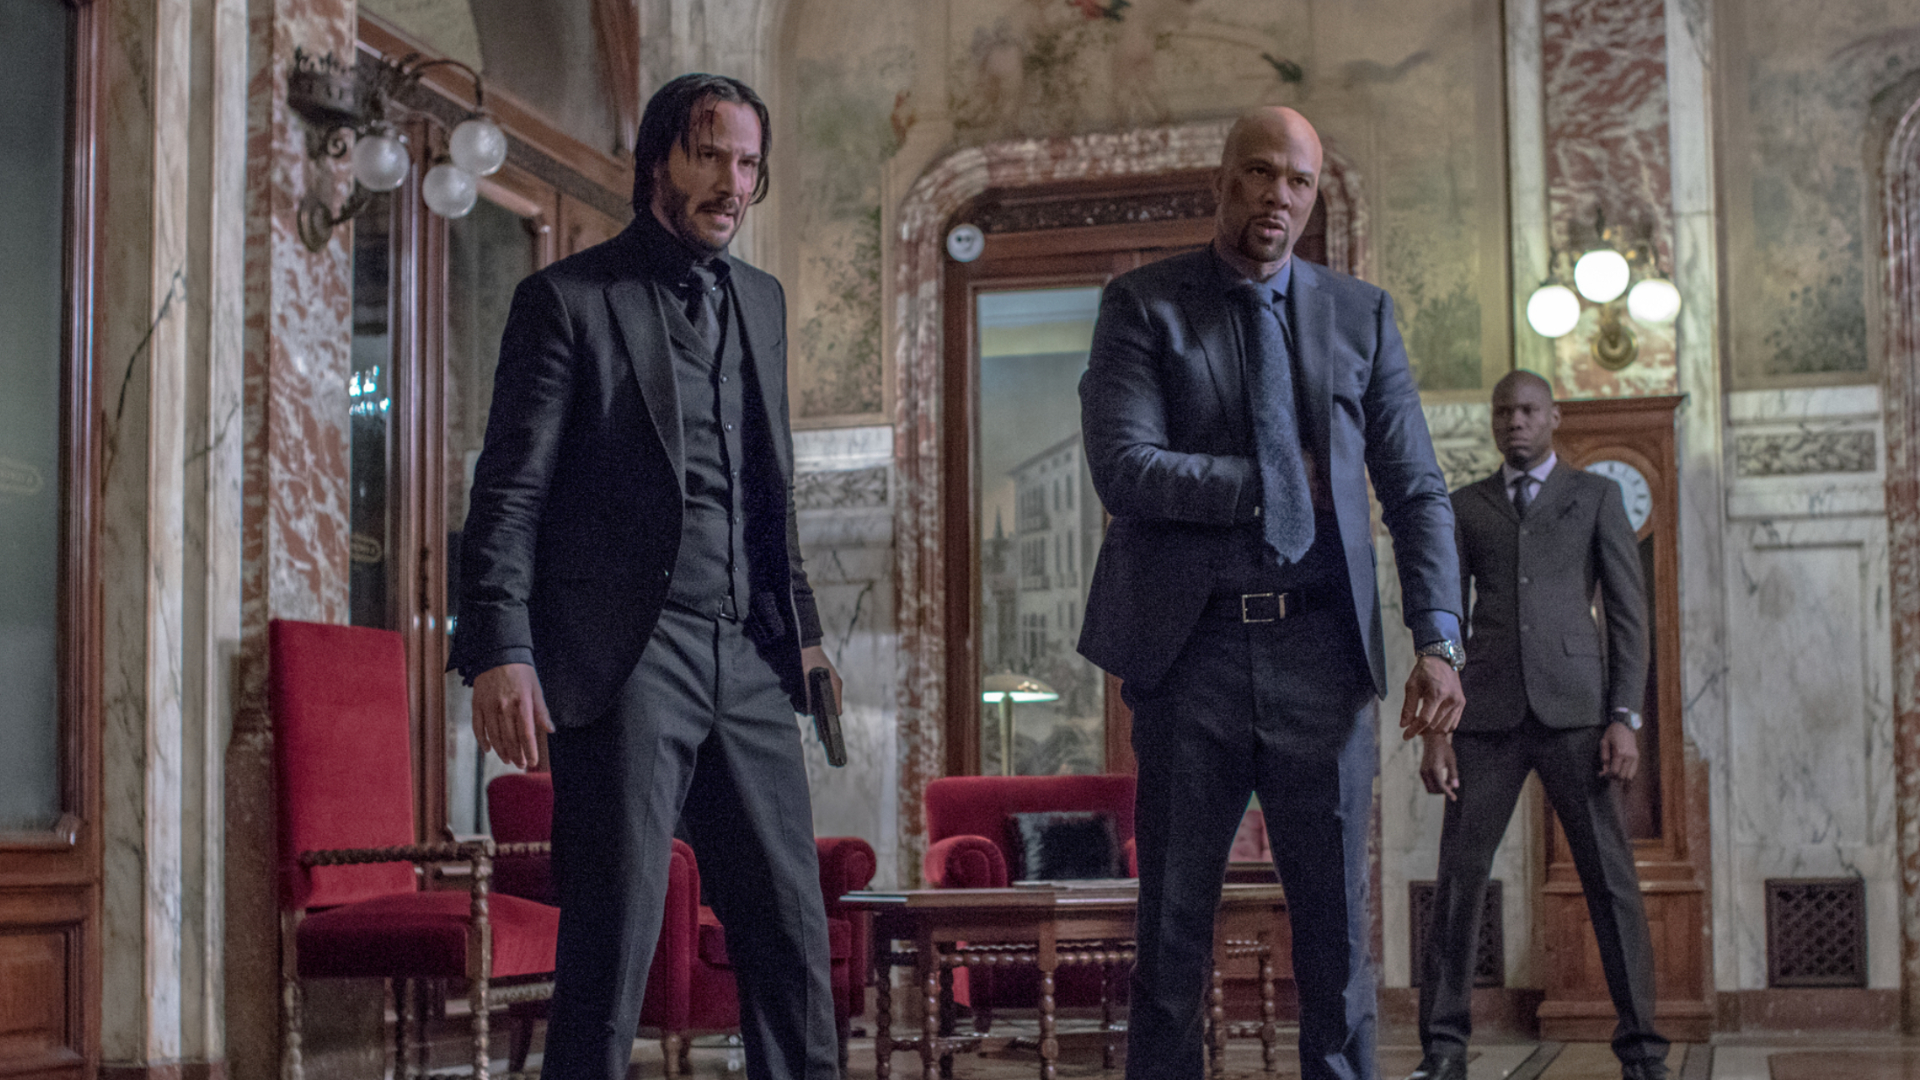 John Wick is standing next to another killer and the couple looks angry in one of the John Wick movies